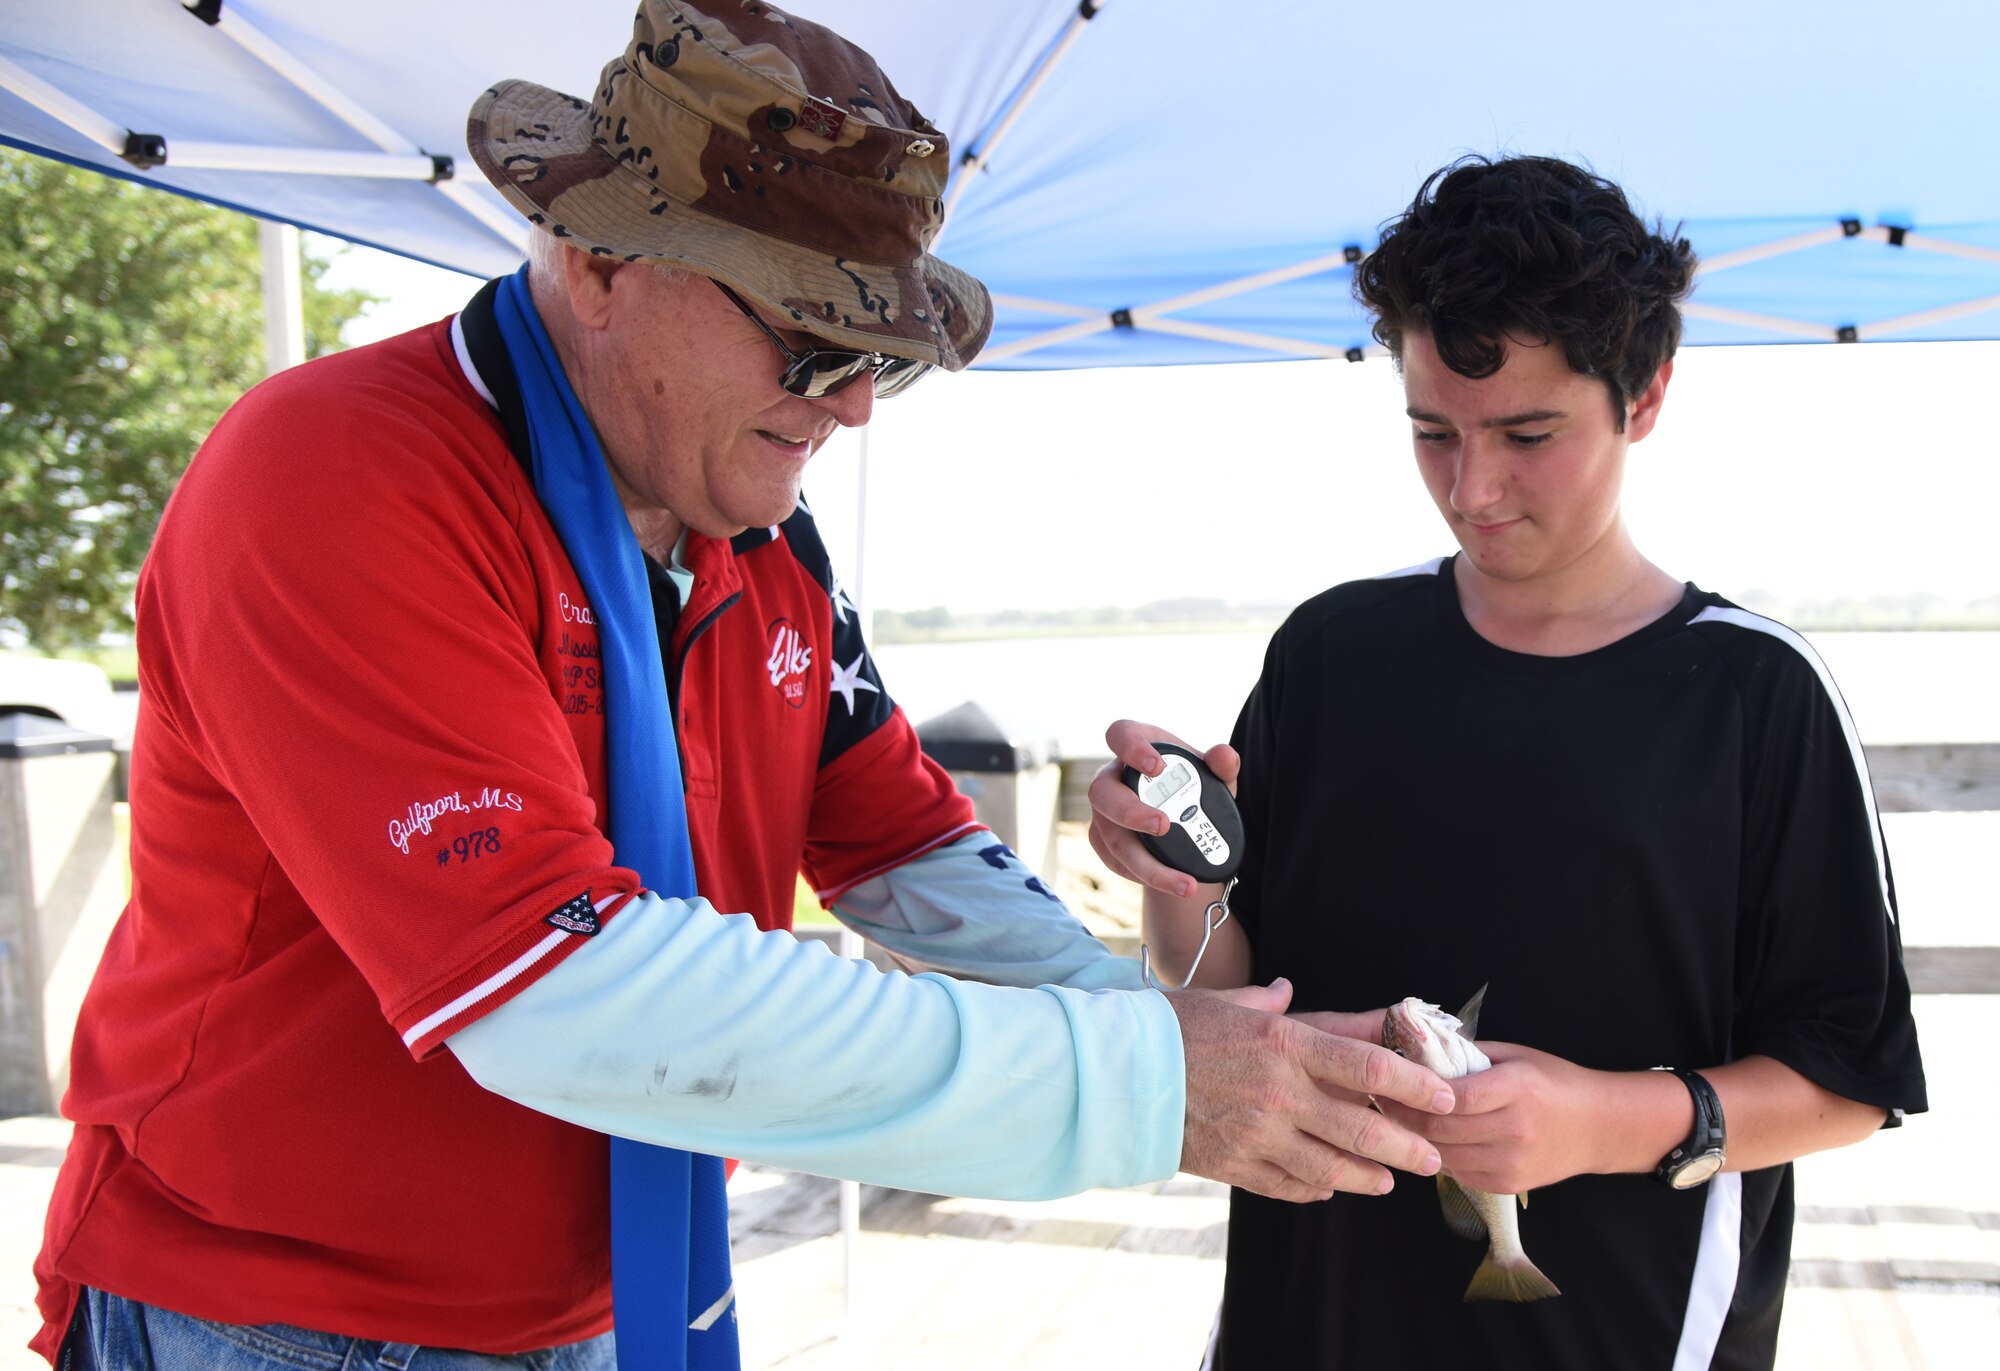 Craig Huch, Gulfport Elks Lodge volunteer, measures a fish caught by Patrick Peoples, son of retired Navy Beldan Peoples, at the kids’ fishing rodeo during the Pops in the Park event at Marina Park July 1, 2017, on Keesler Air Force Base, Miss. The event also included a mullet toss, fireworks display and music performances. (U.S. Air Force photo by Kemberly Groue)